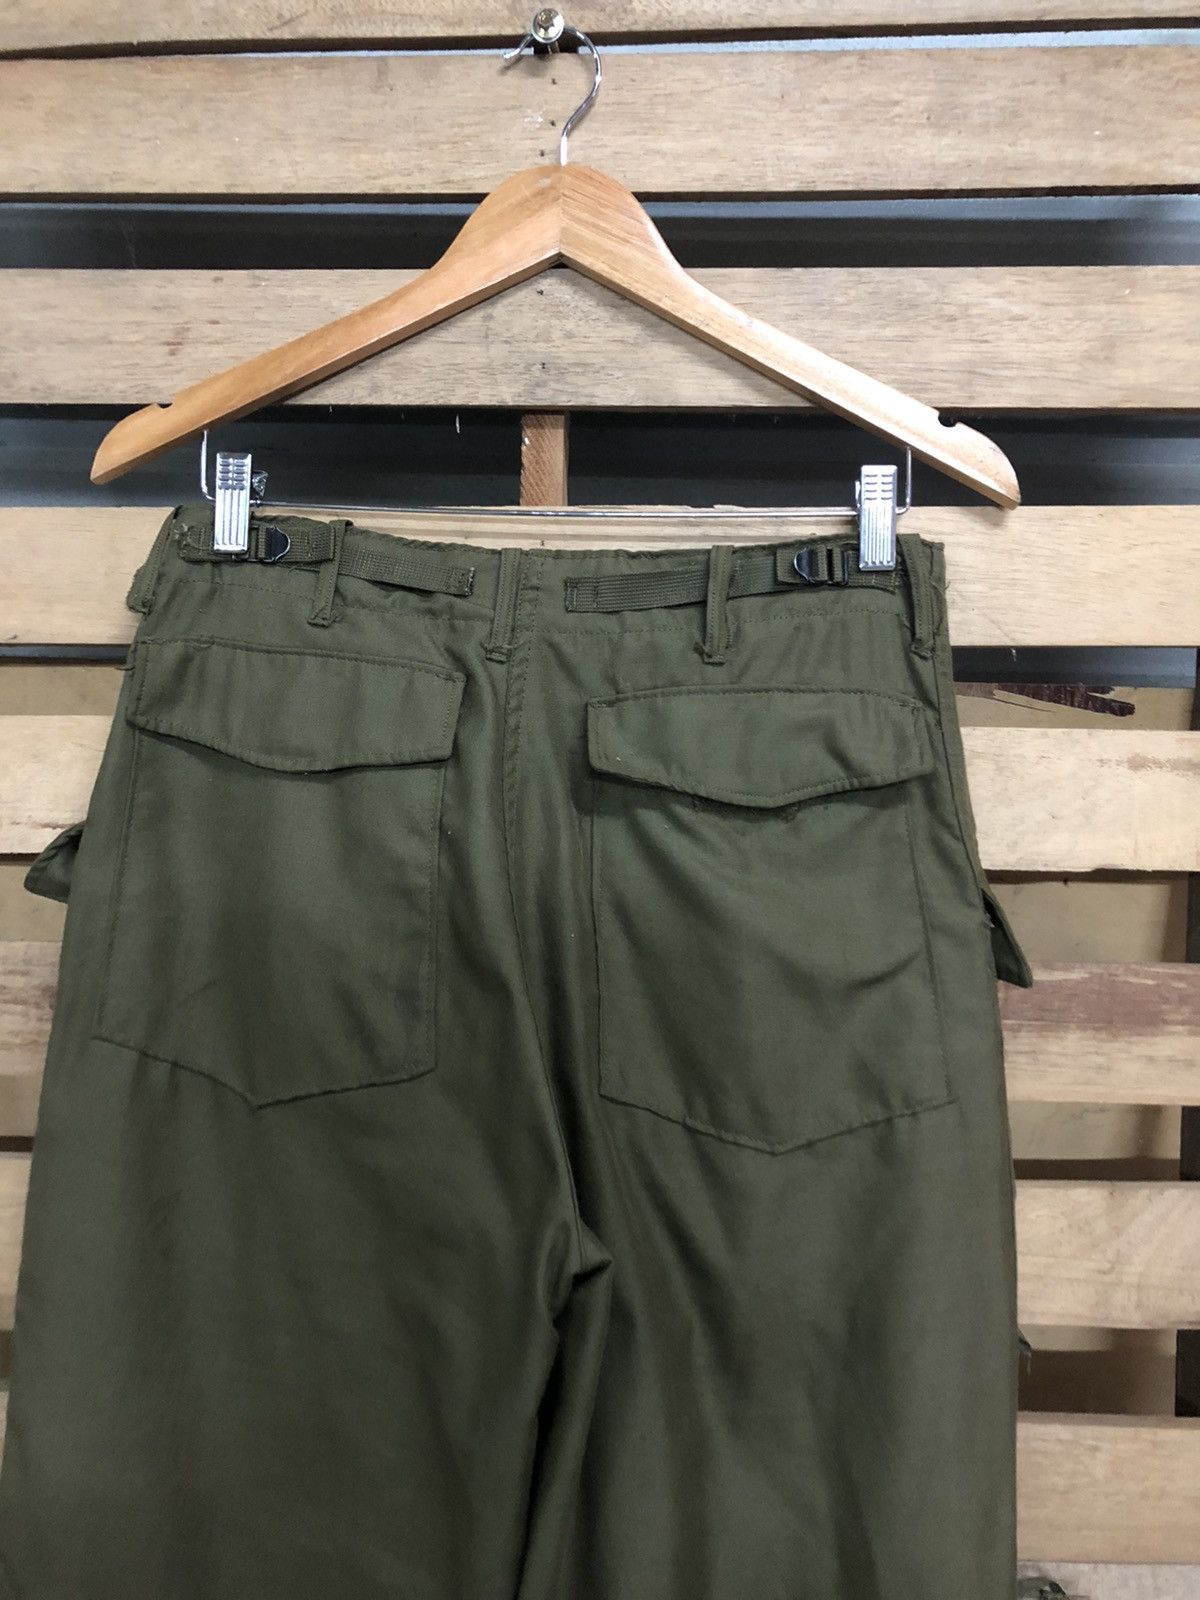 Military - Vintage 90s Army Trousers OG-106 Cargo Rare Design - 3